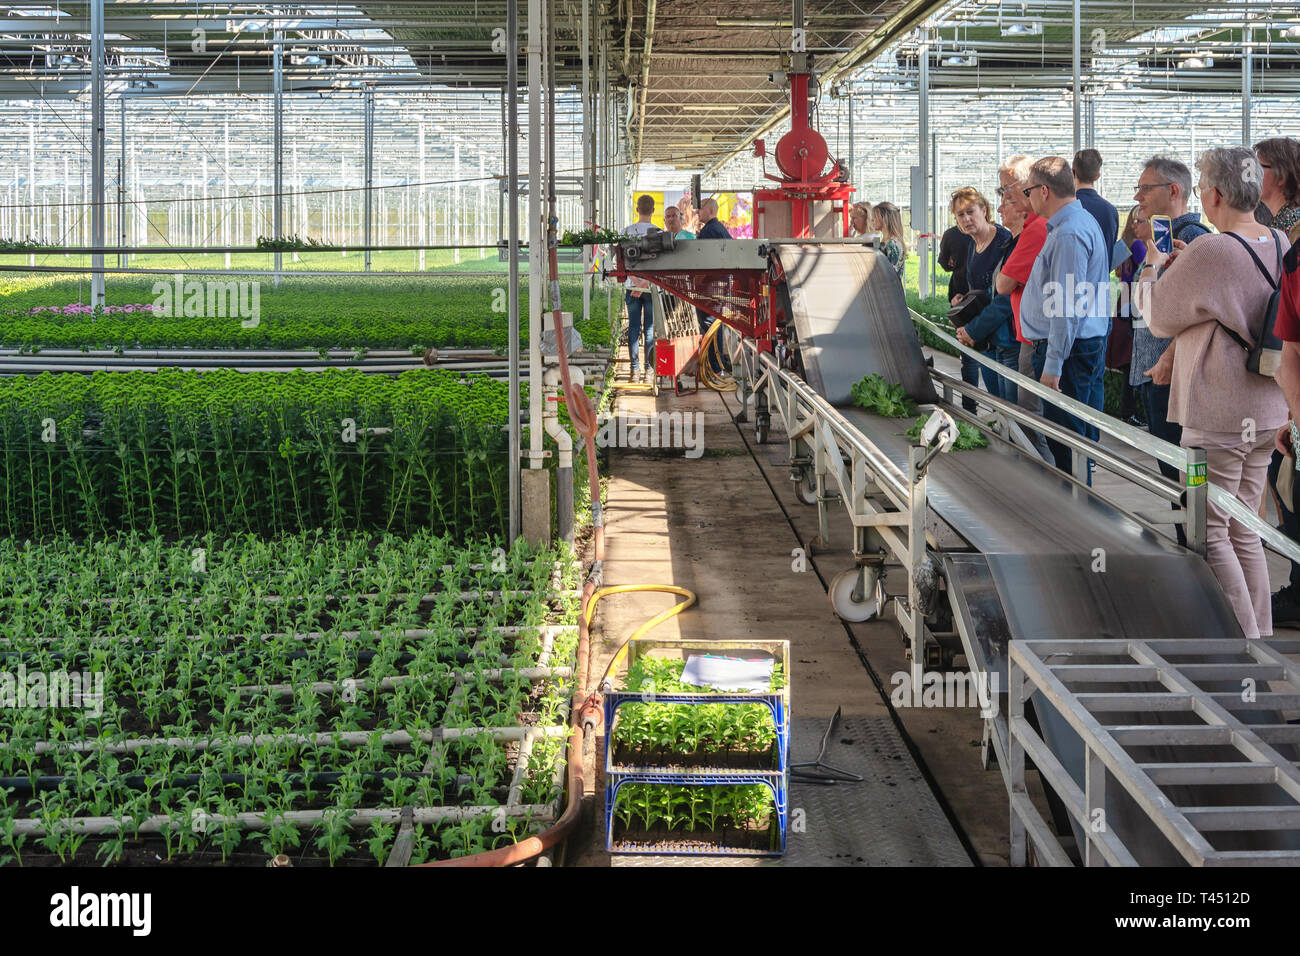 Nootdorp, The Netherlands, April 7, 2019: People view the semi-automatic process of cut-off santinis in a huge greenhouse Stock Photo